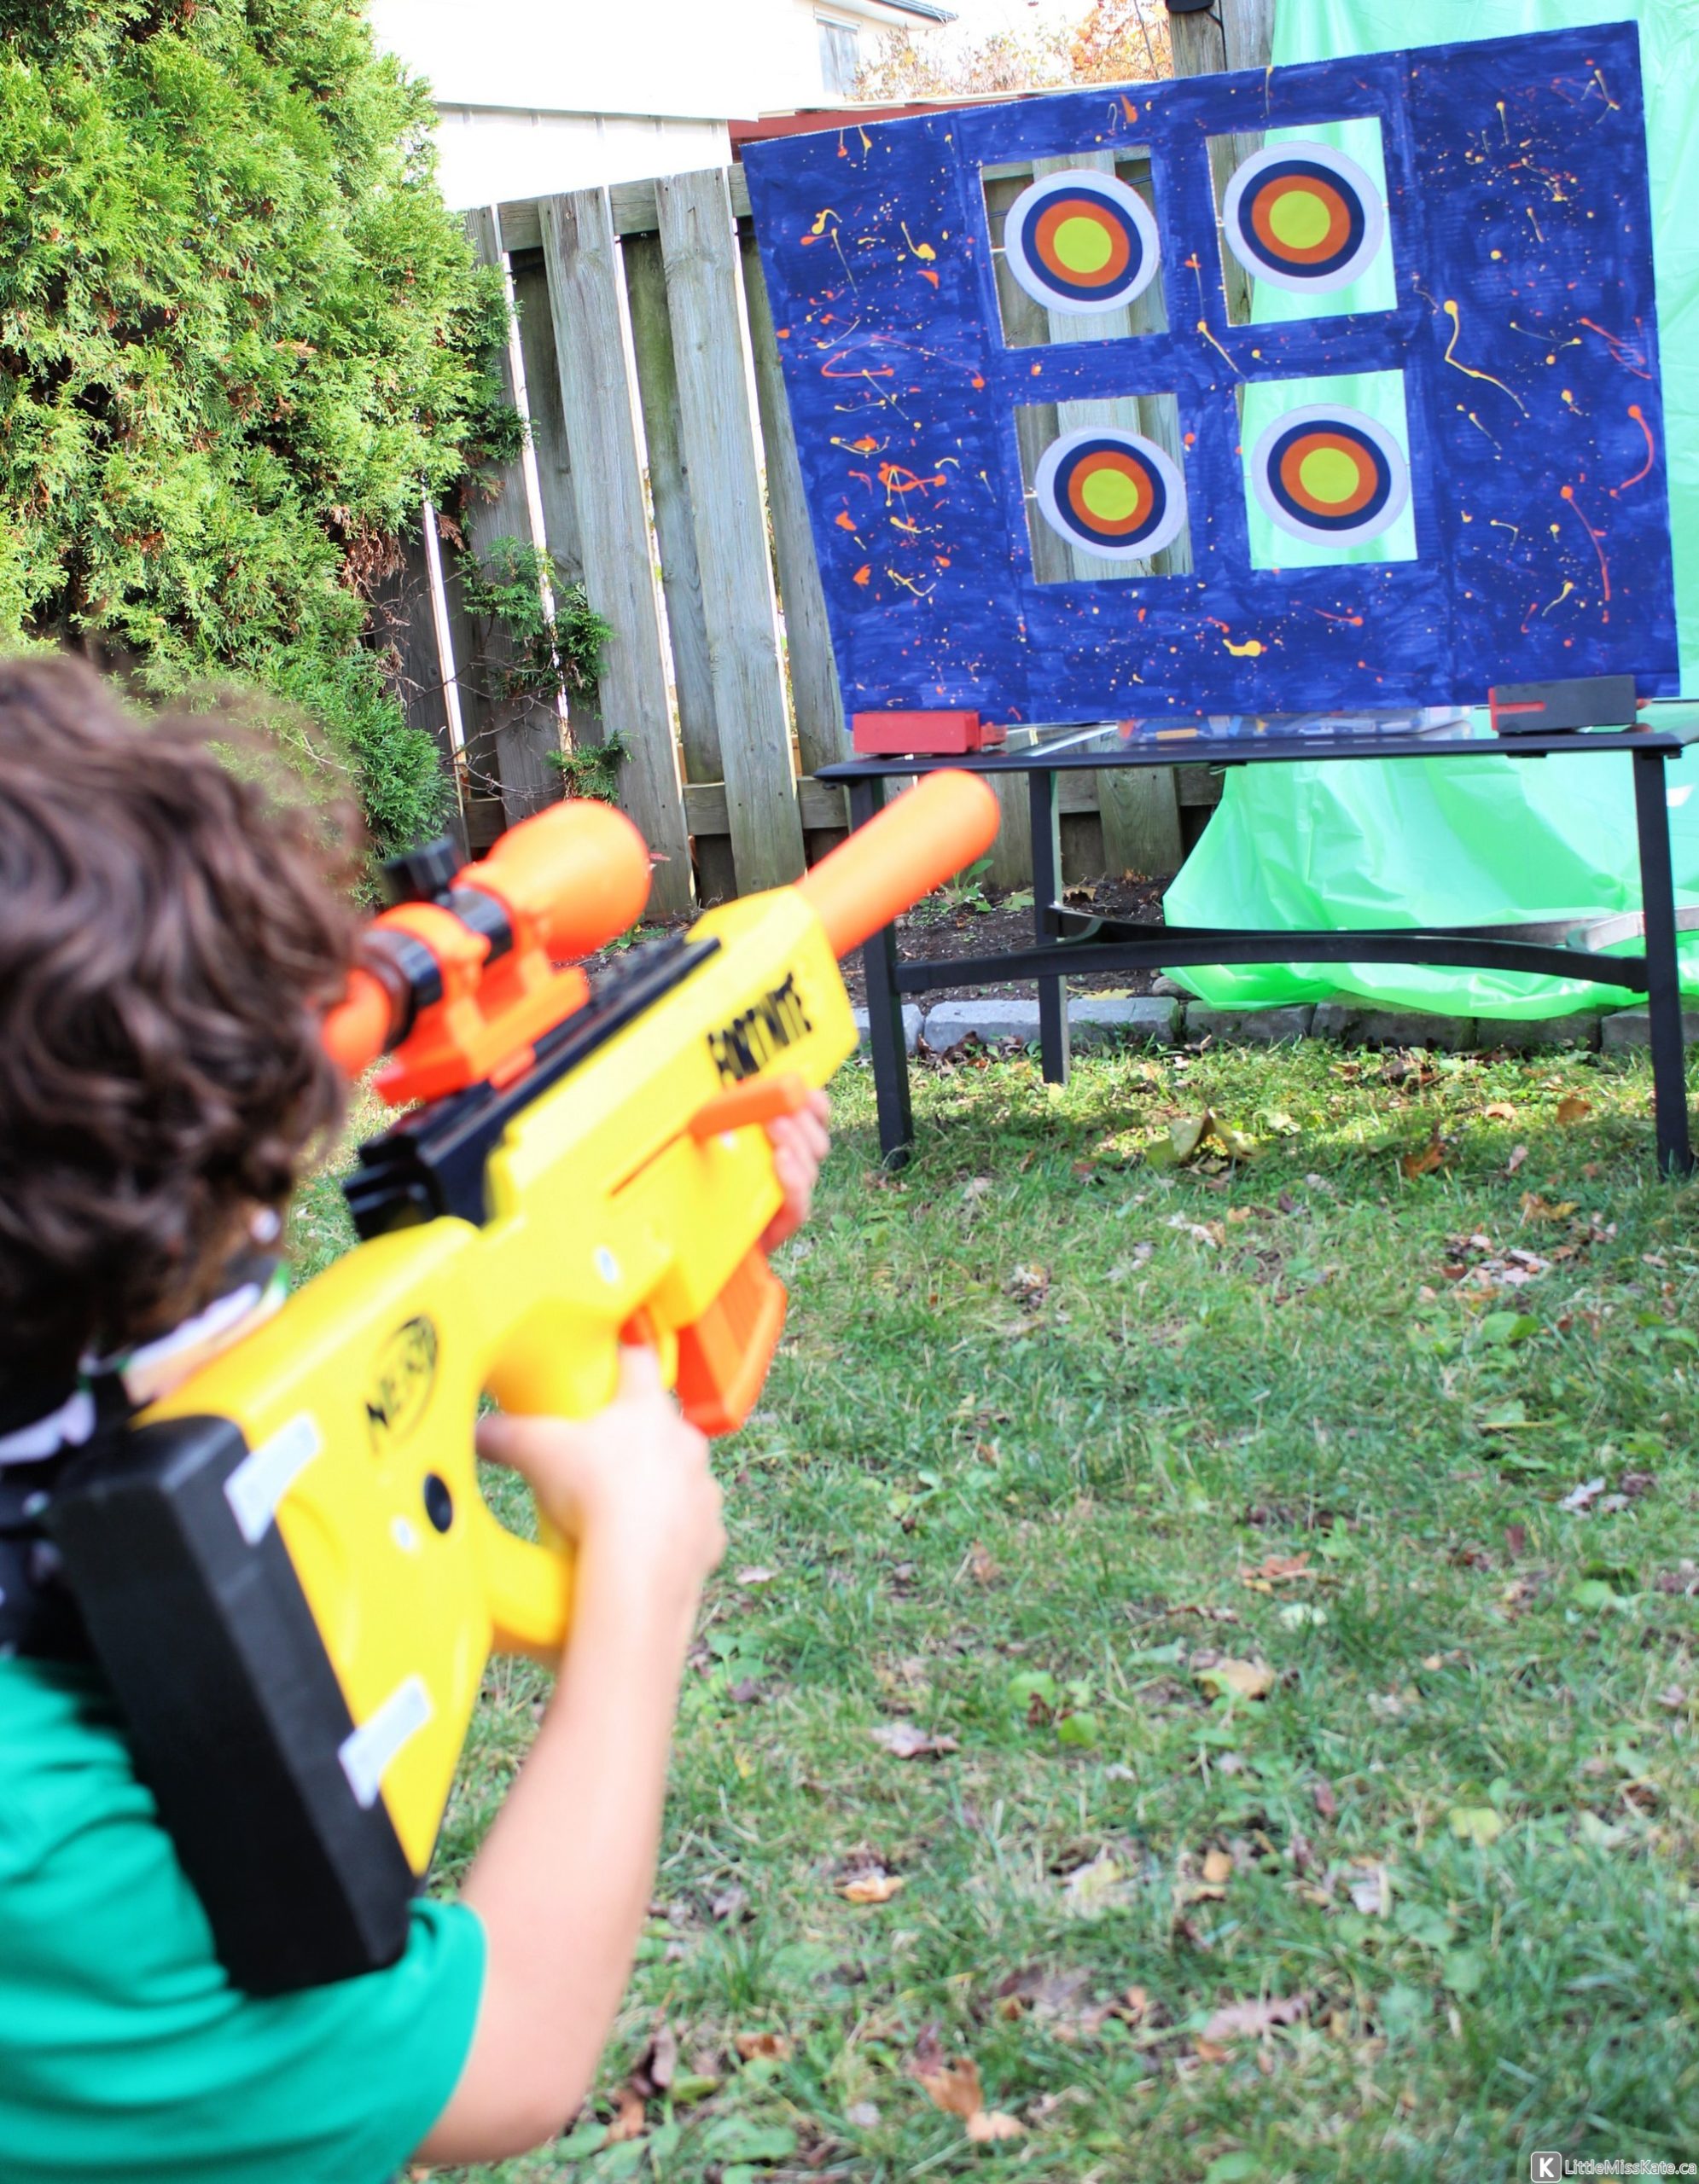 Nerf party ideas make your own targets